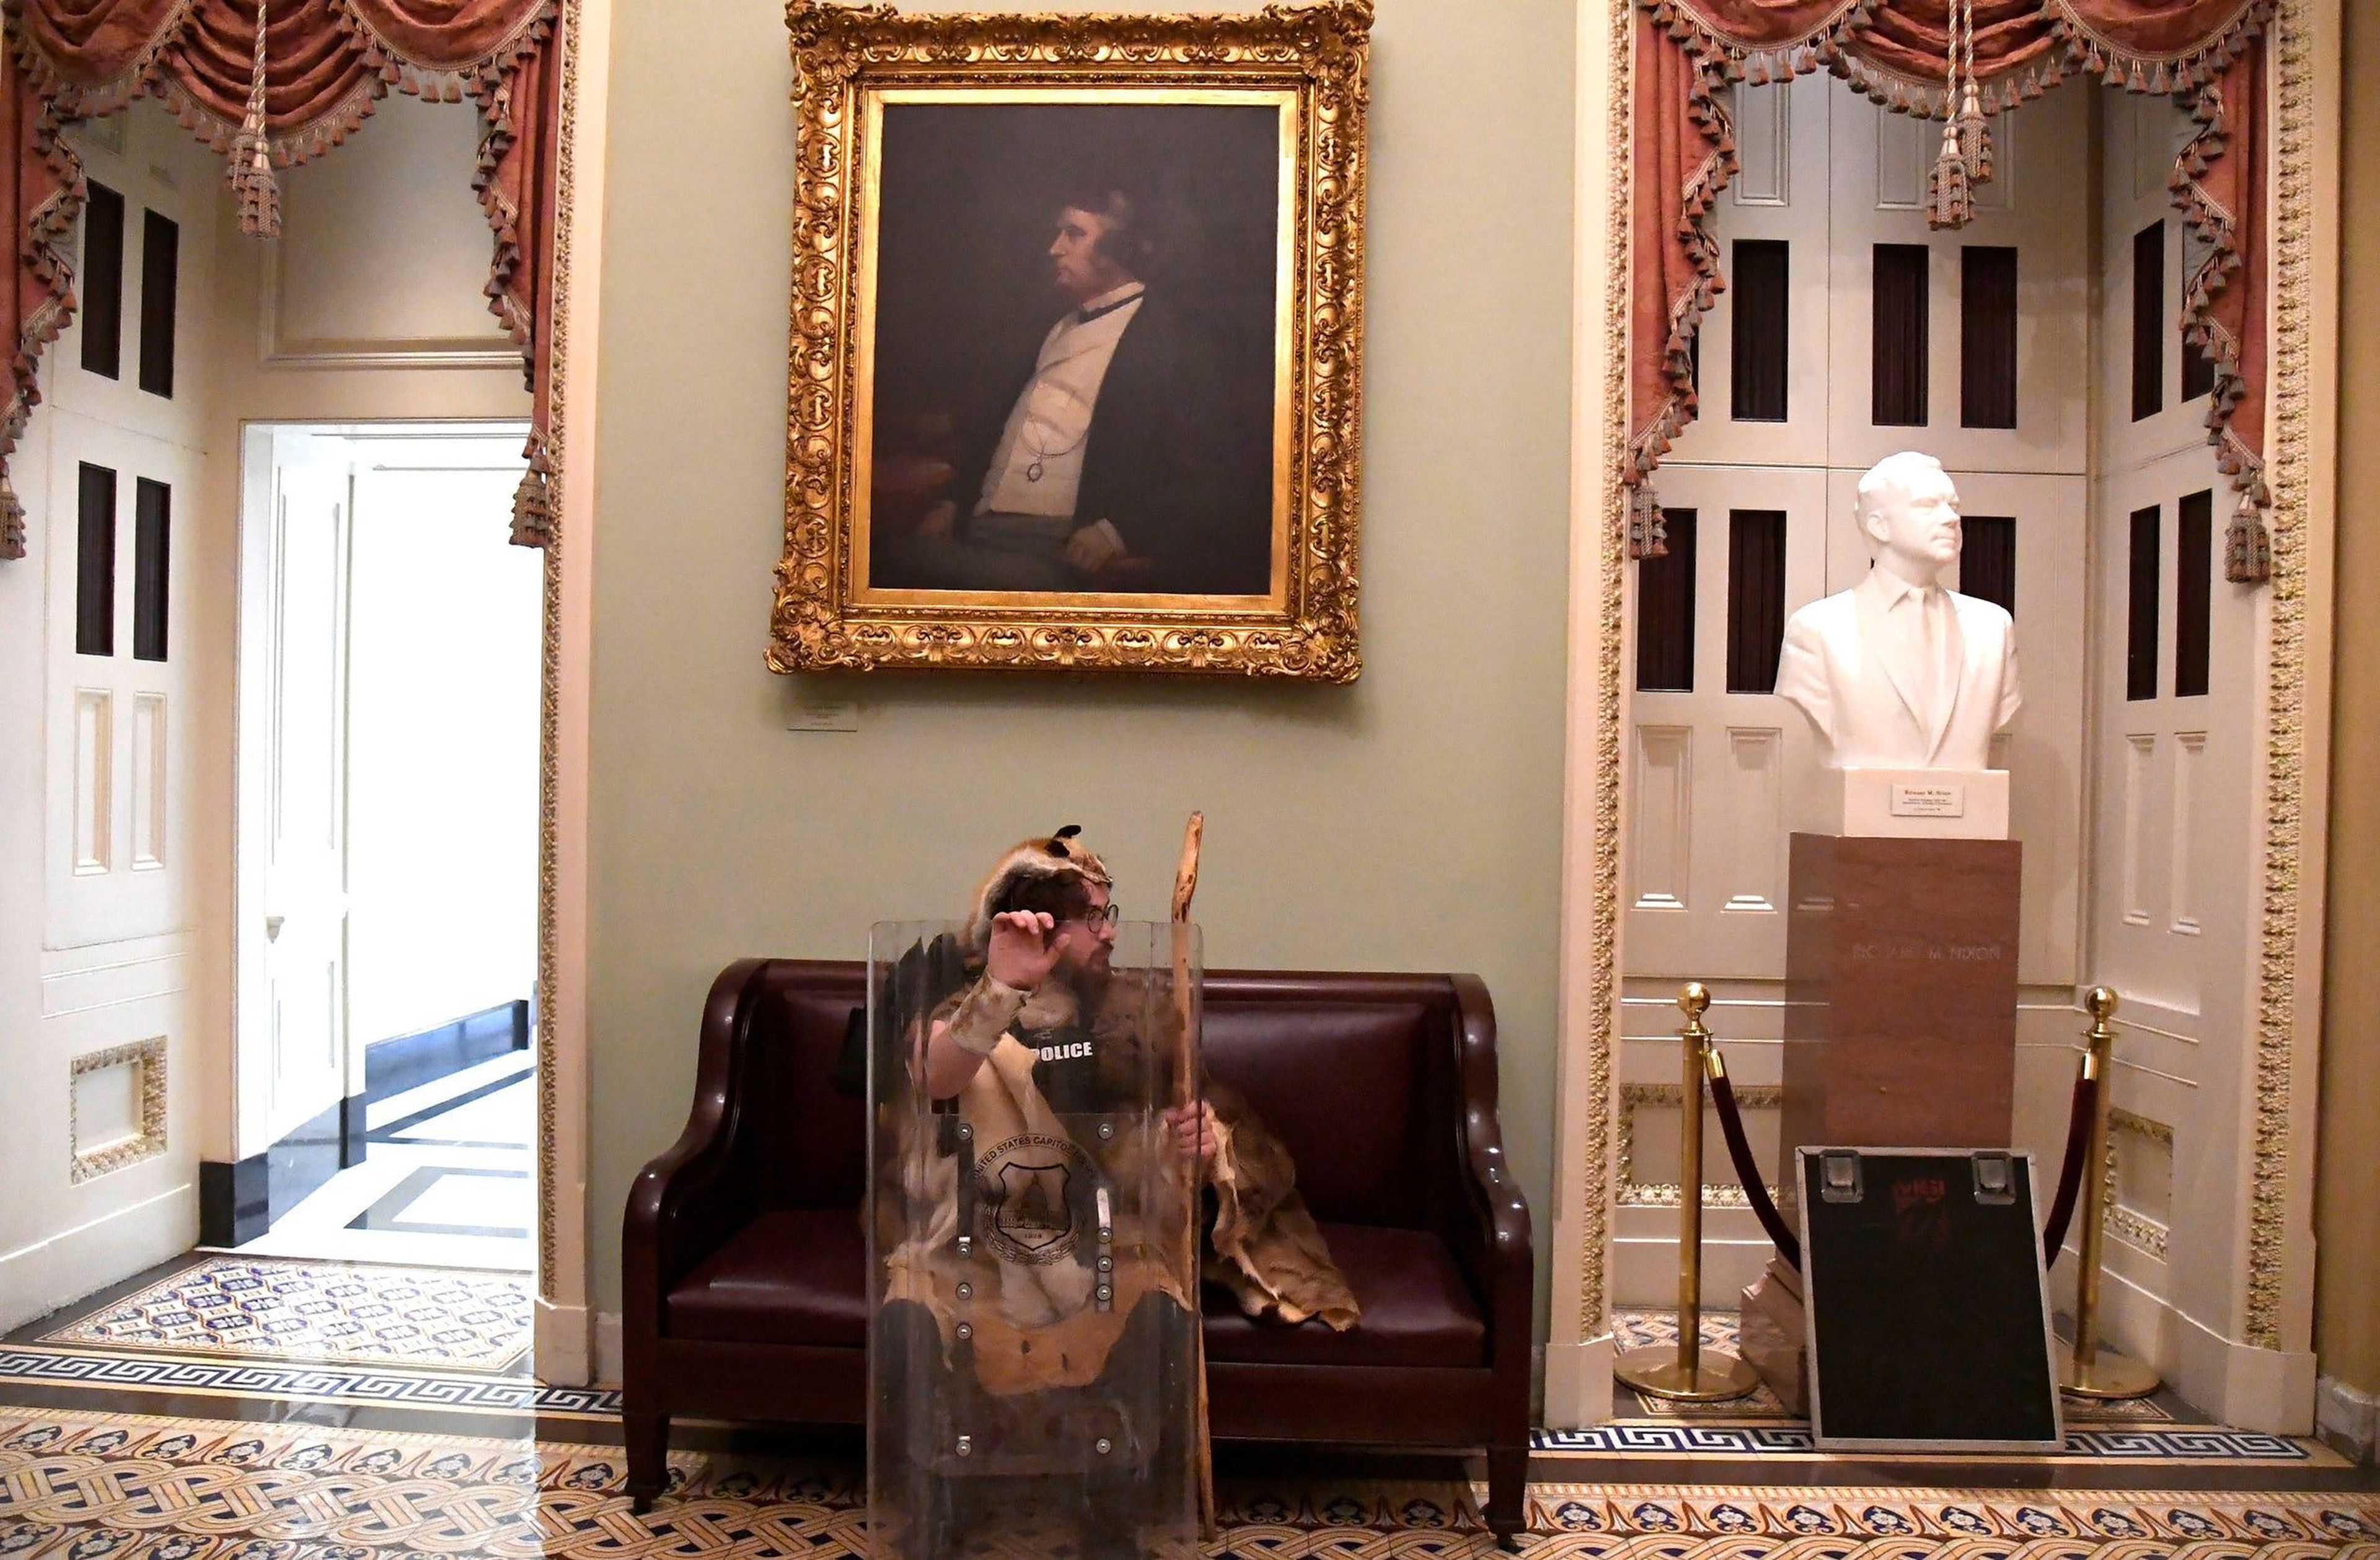 A supporter of President Donald Trump takes a seat away from the action on the second floor of the US Capitol.